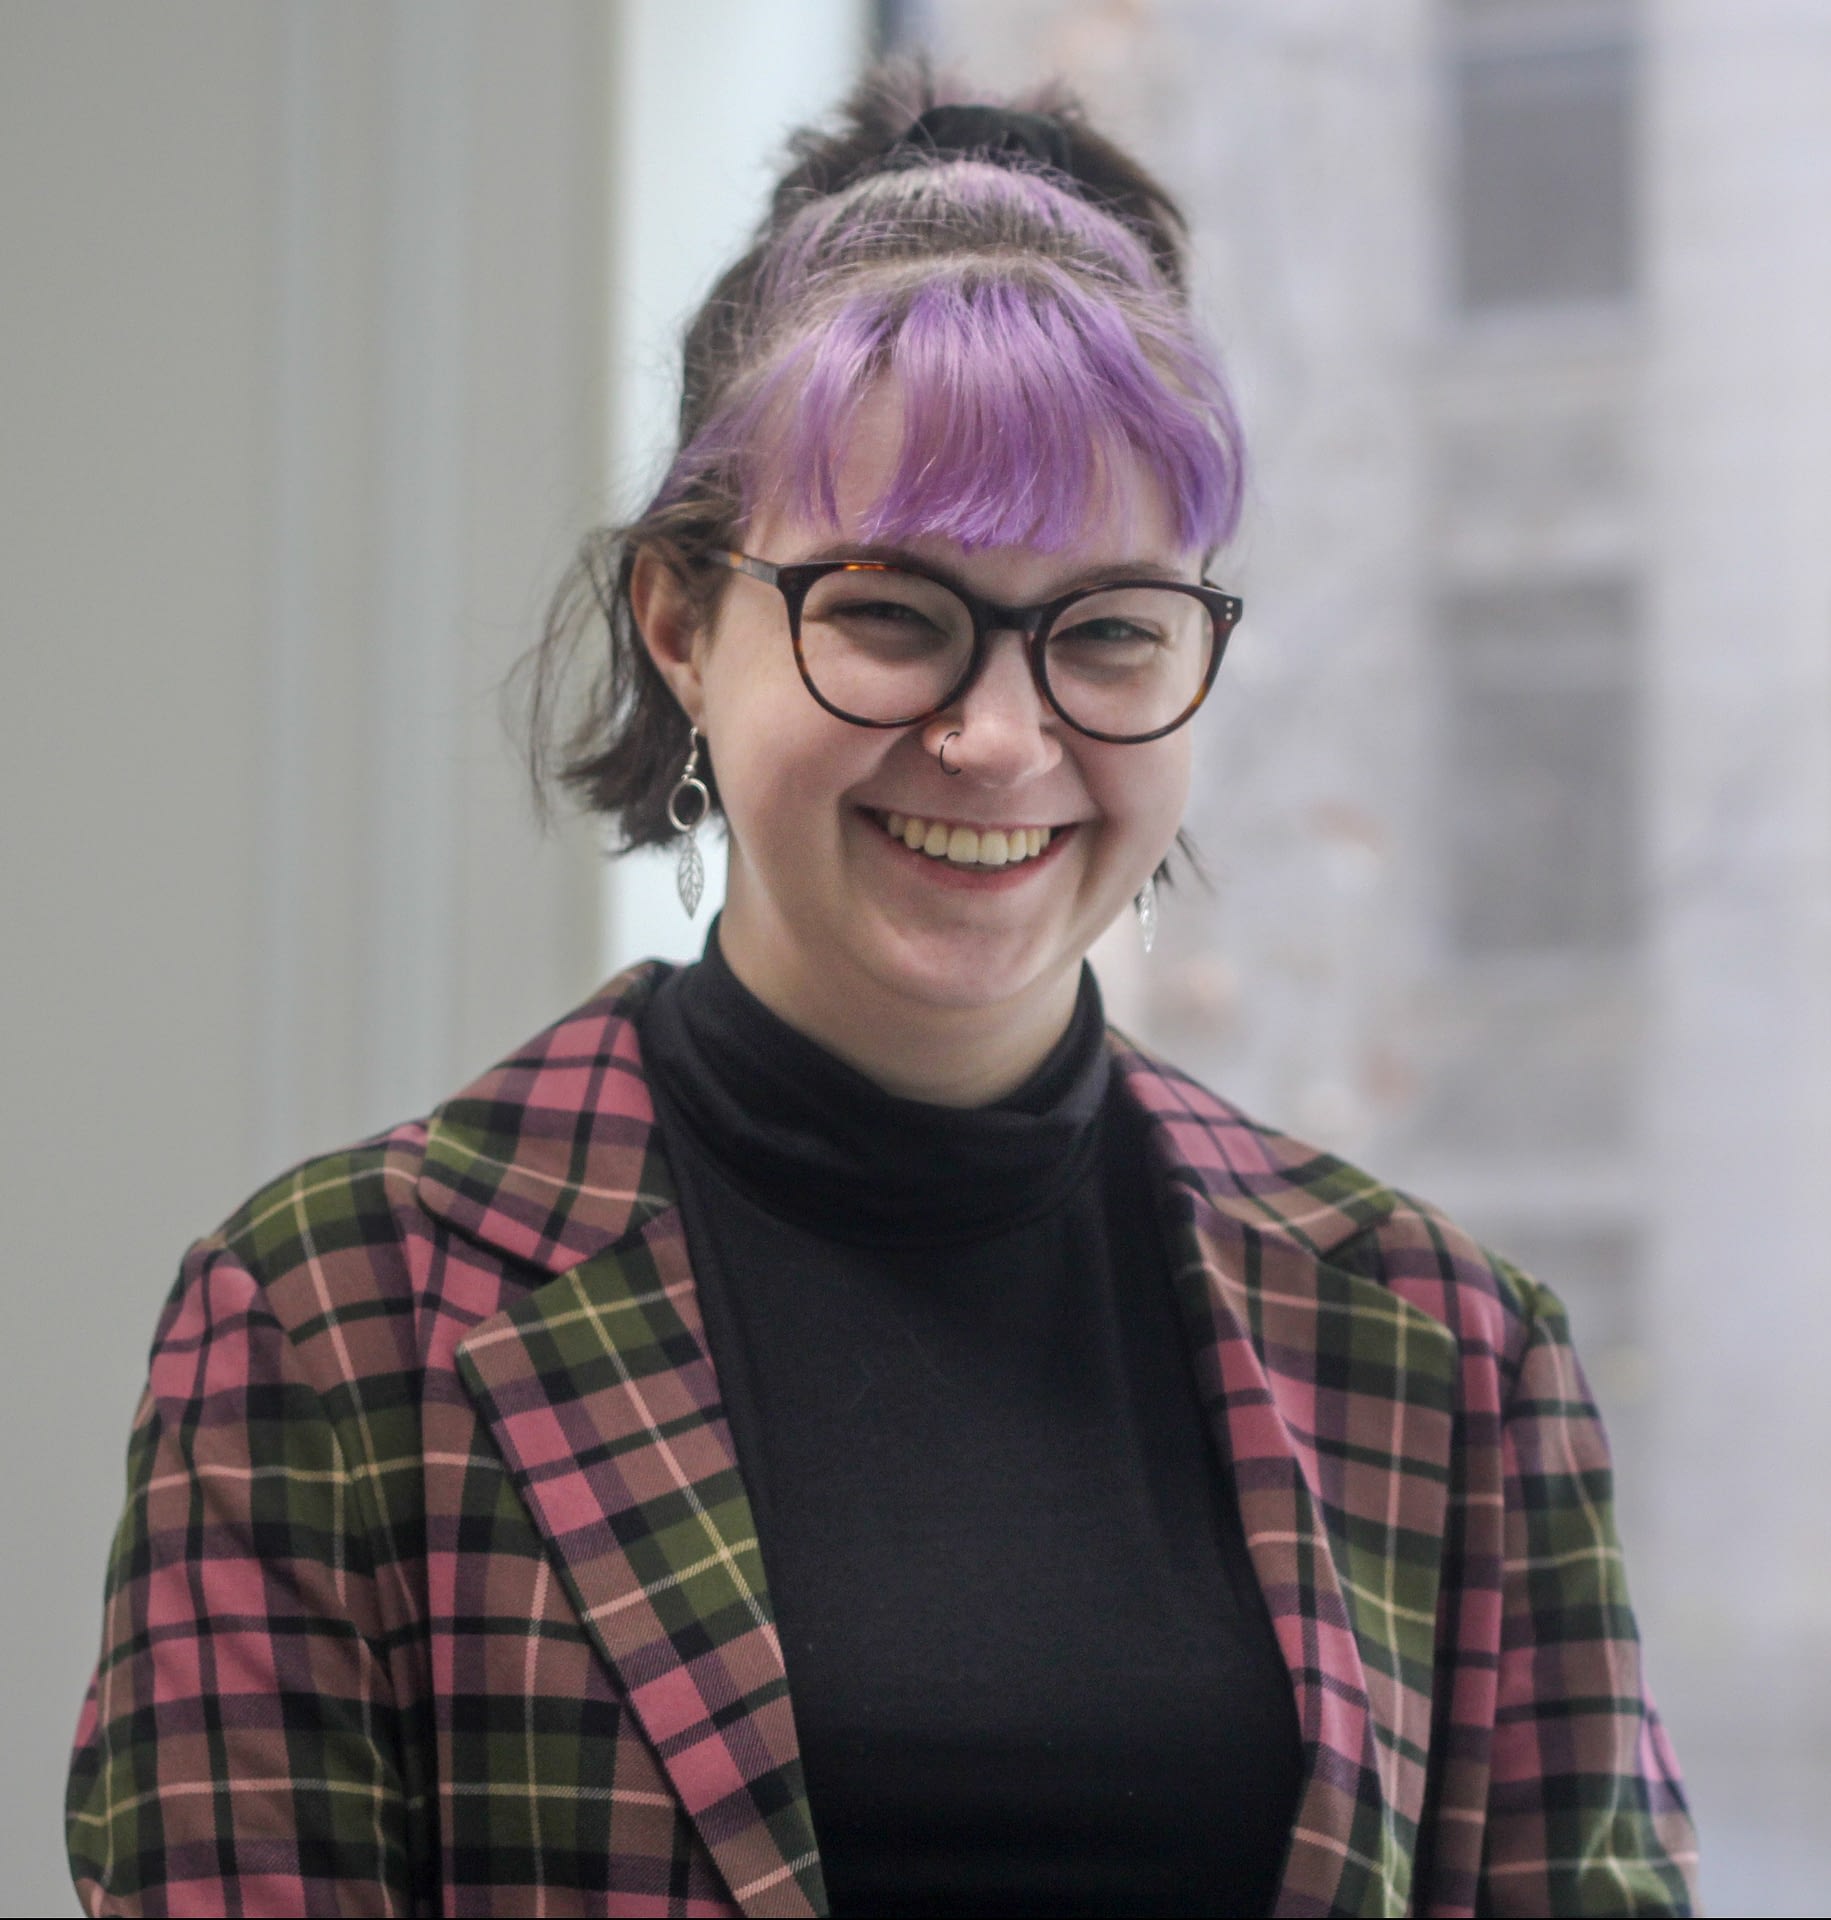 Photo of Issy Orosz, a young white disabled person with short brown and lavender hair. They are wearing a plaid blazer, black turtleneck sweater, and round glasses.